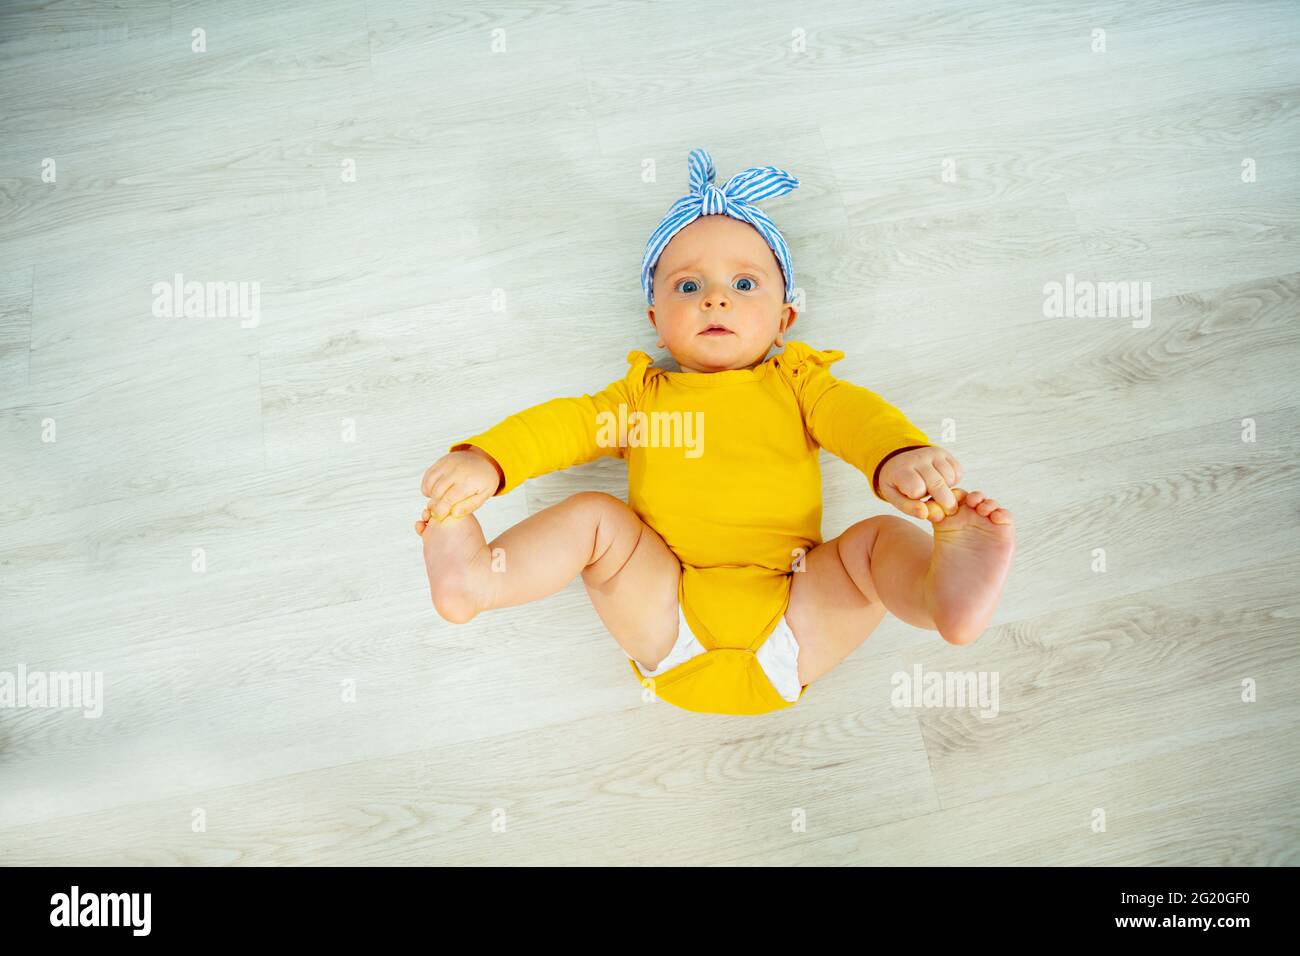 Little baby girl with blue bow view from above Stock Photo